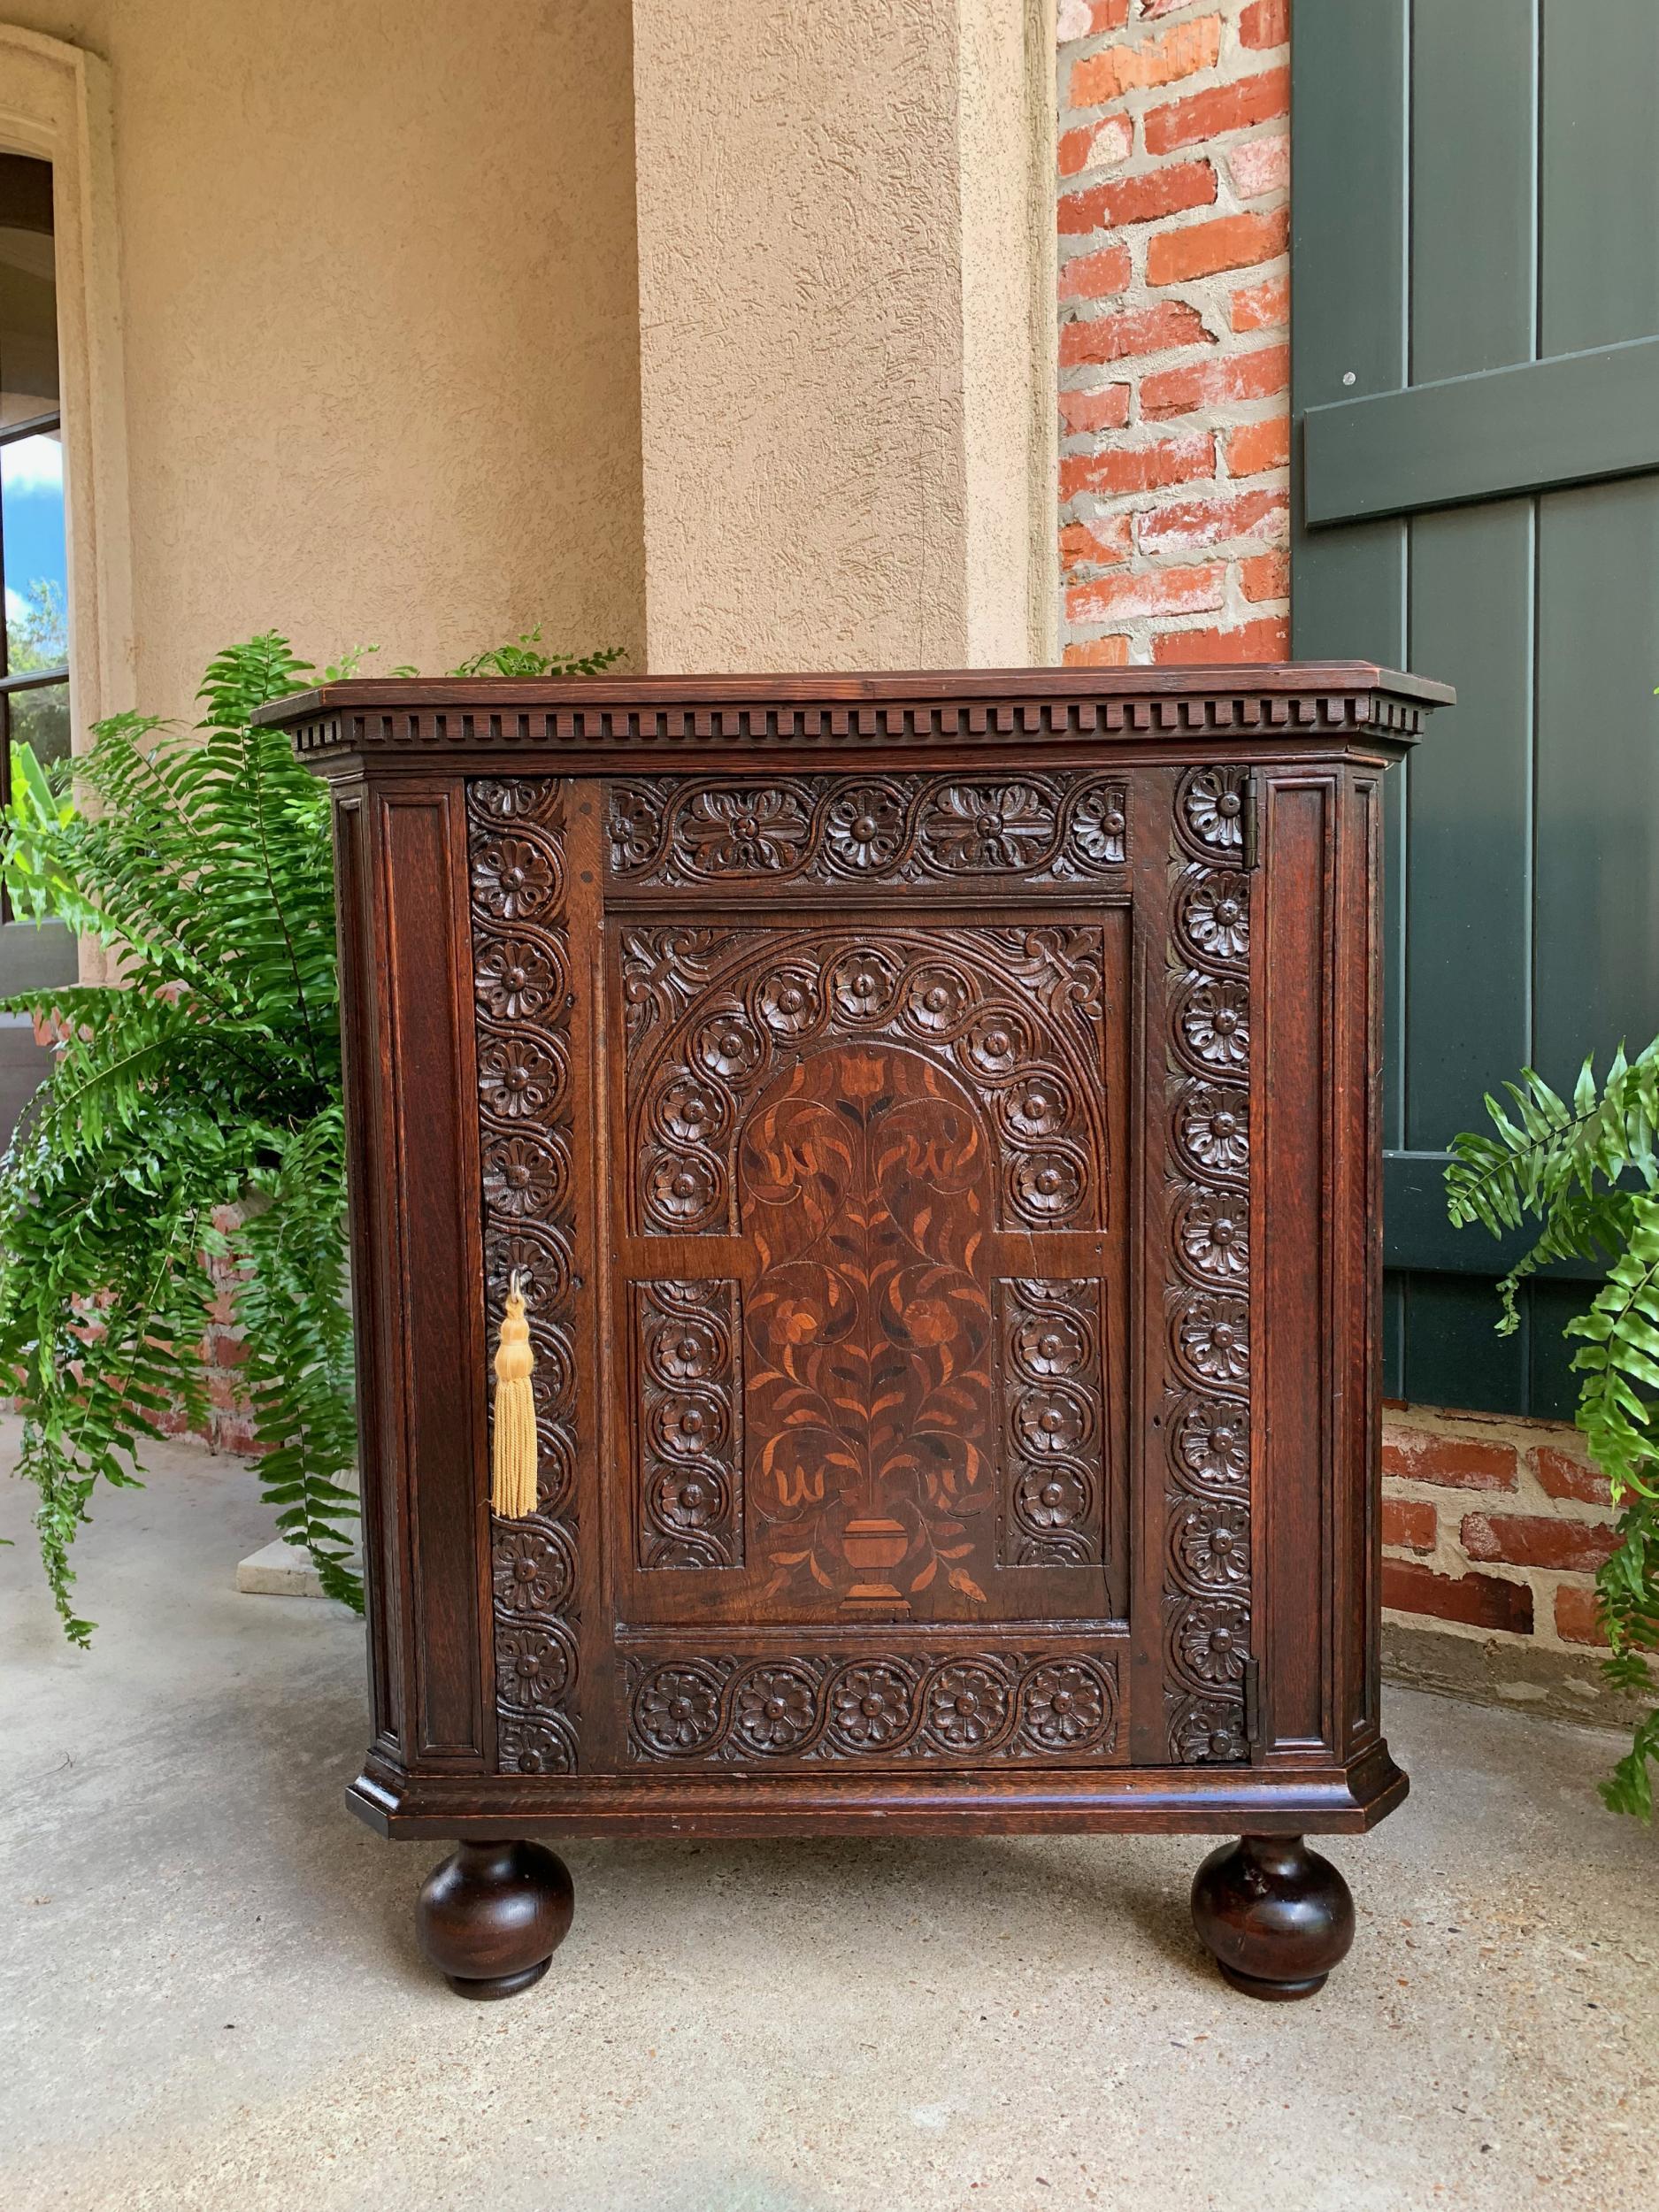 Antique English carved oak corner cabinet marquetry side table 19th century.

Direct from England, a highly carved antique oak corner cabinet or table.
Dentil trim crown below the beveled edge top, across the entire front and canted corners.
Wide